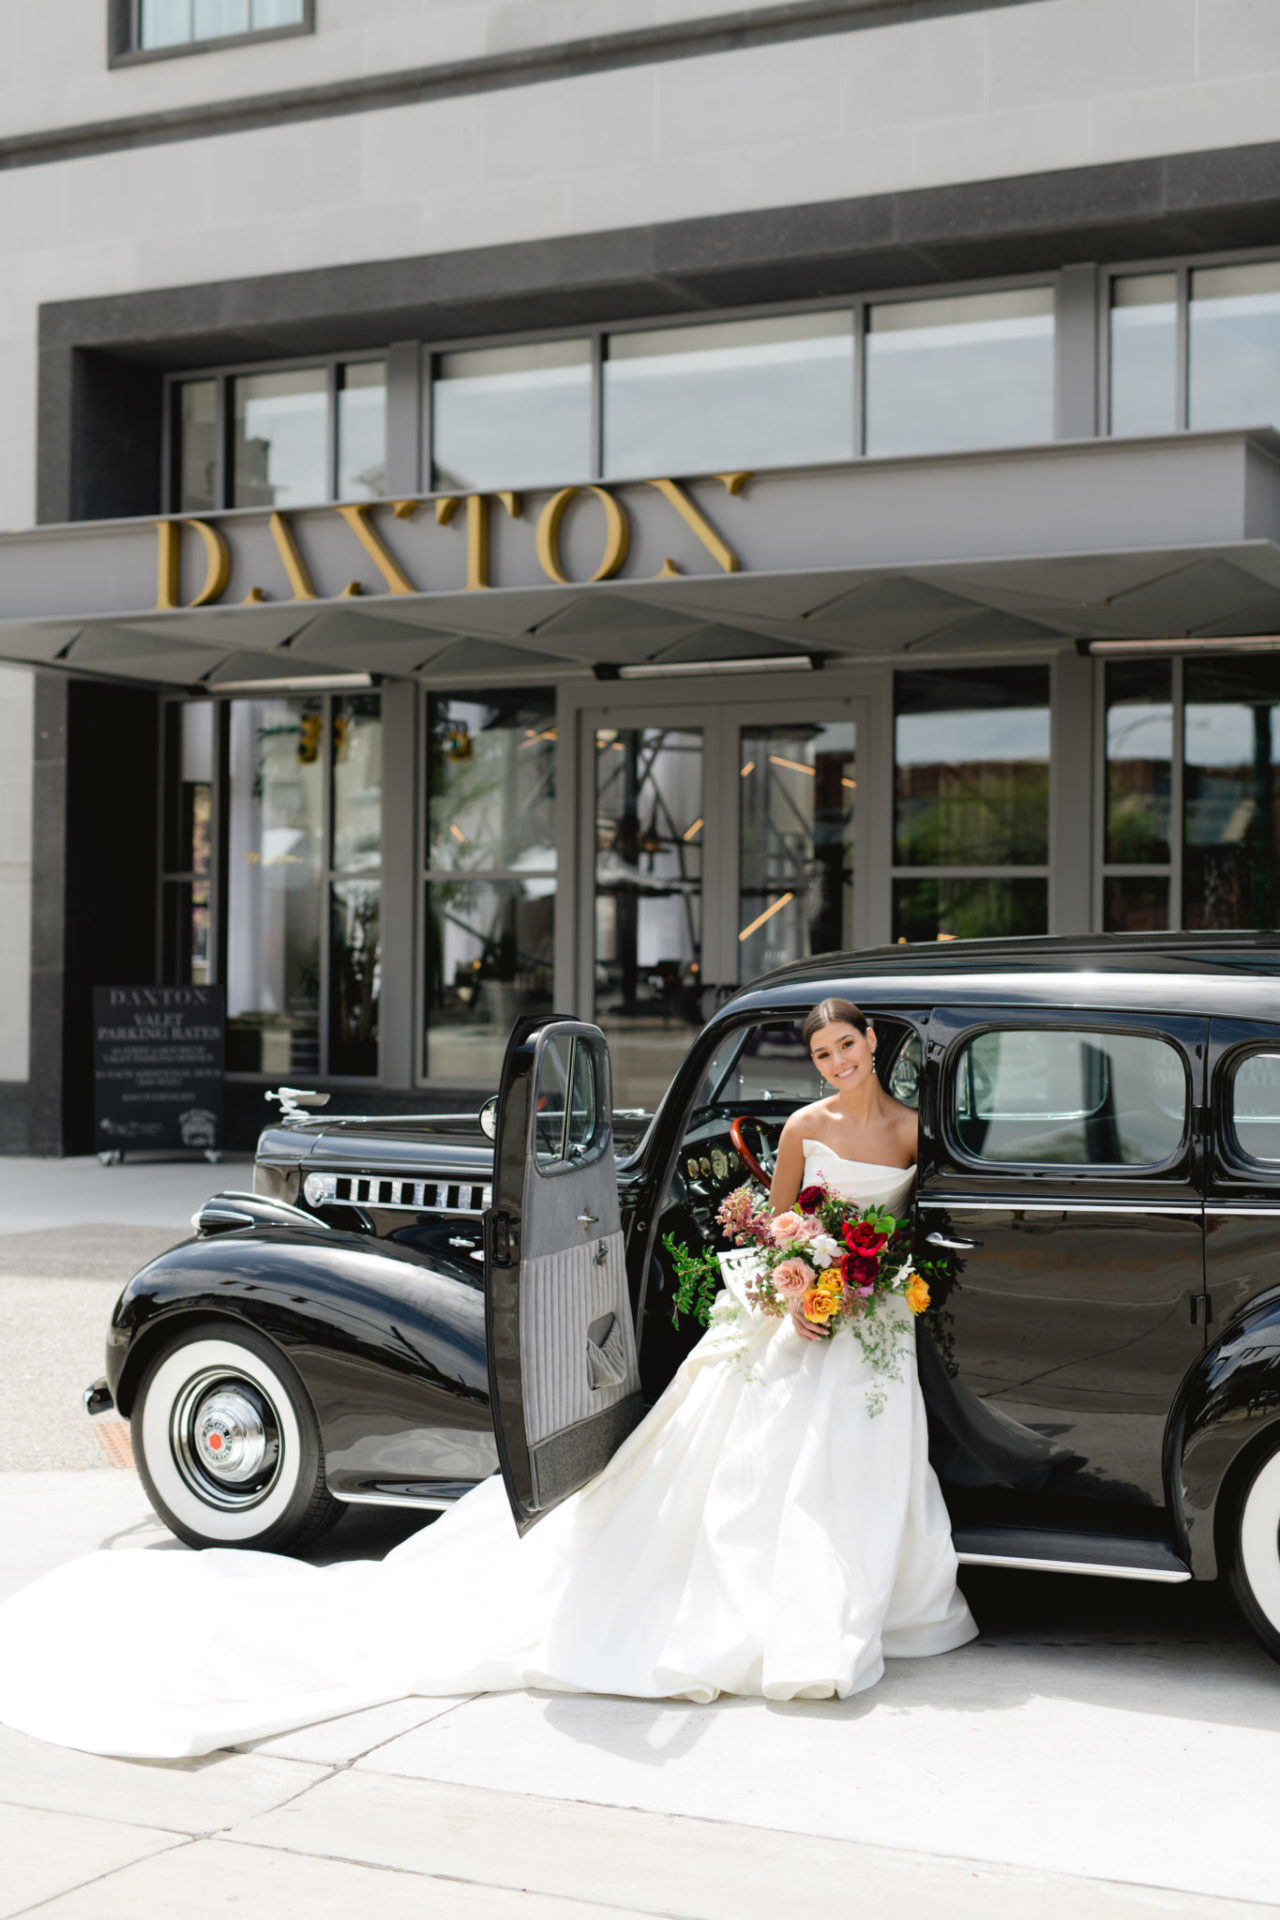 Stunning bride standing outside the Front of the Daxton Hotel in an old black car